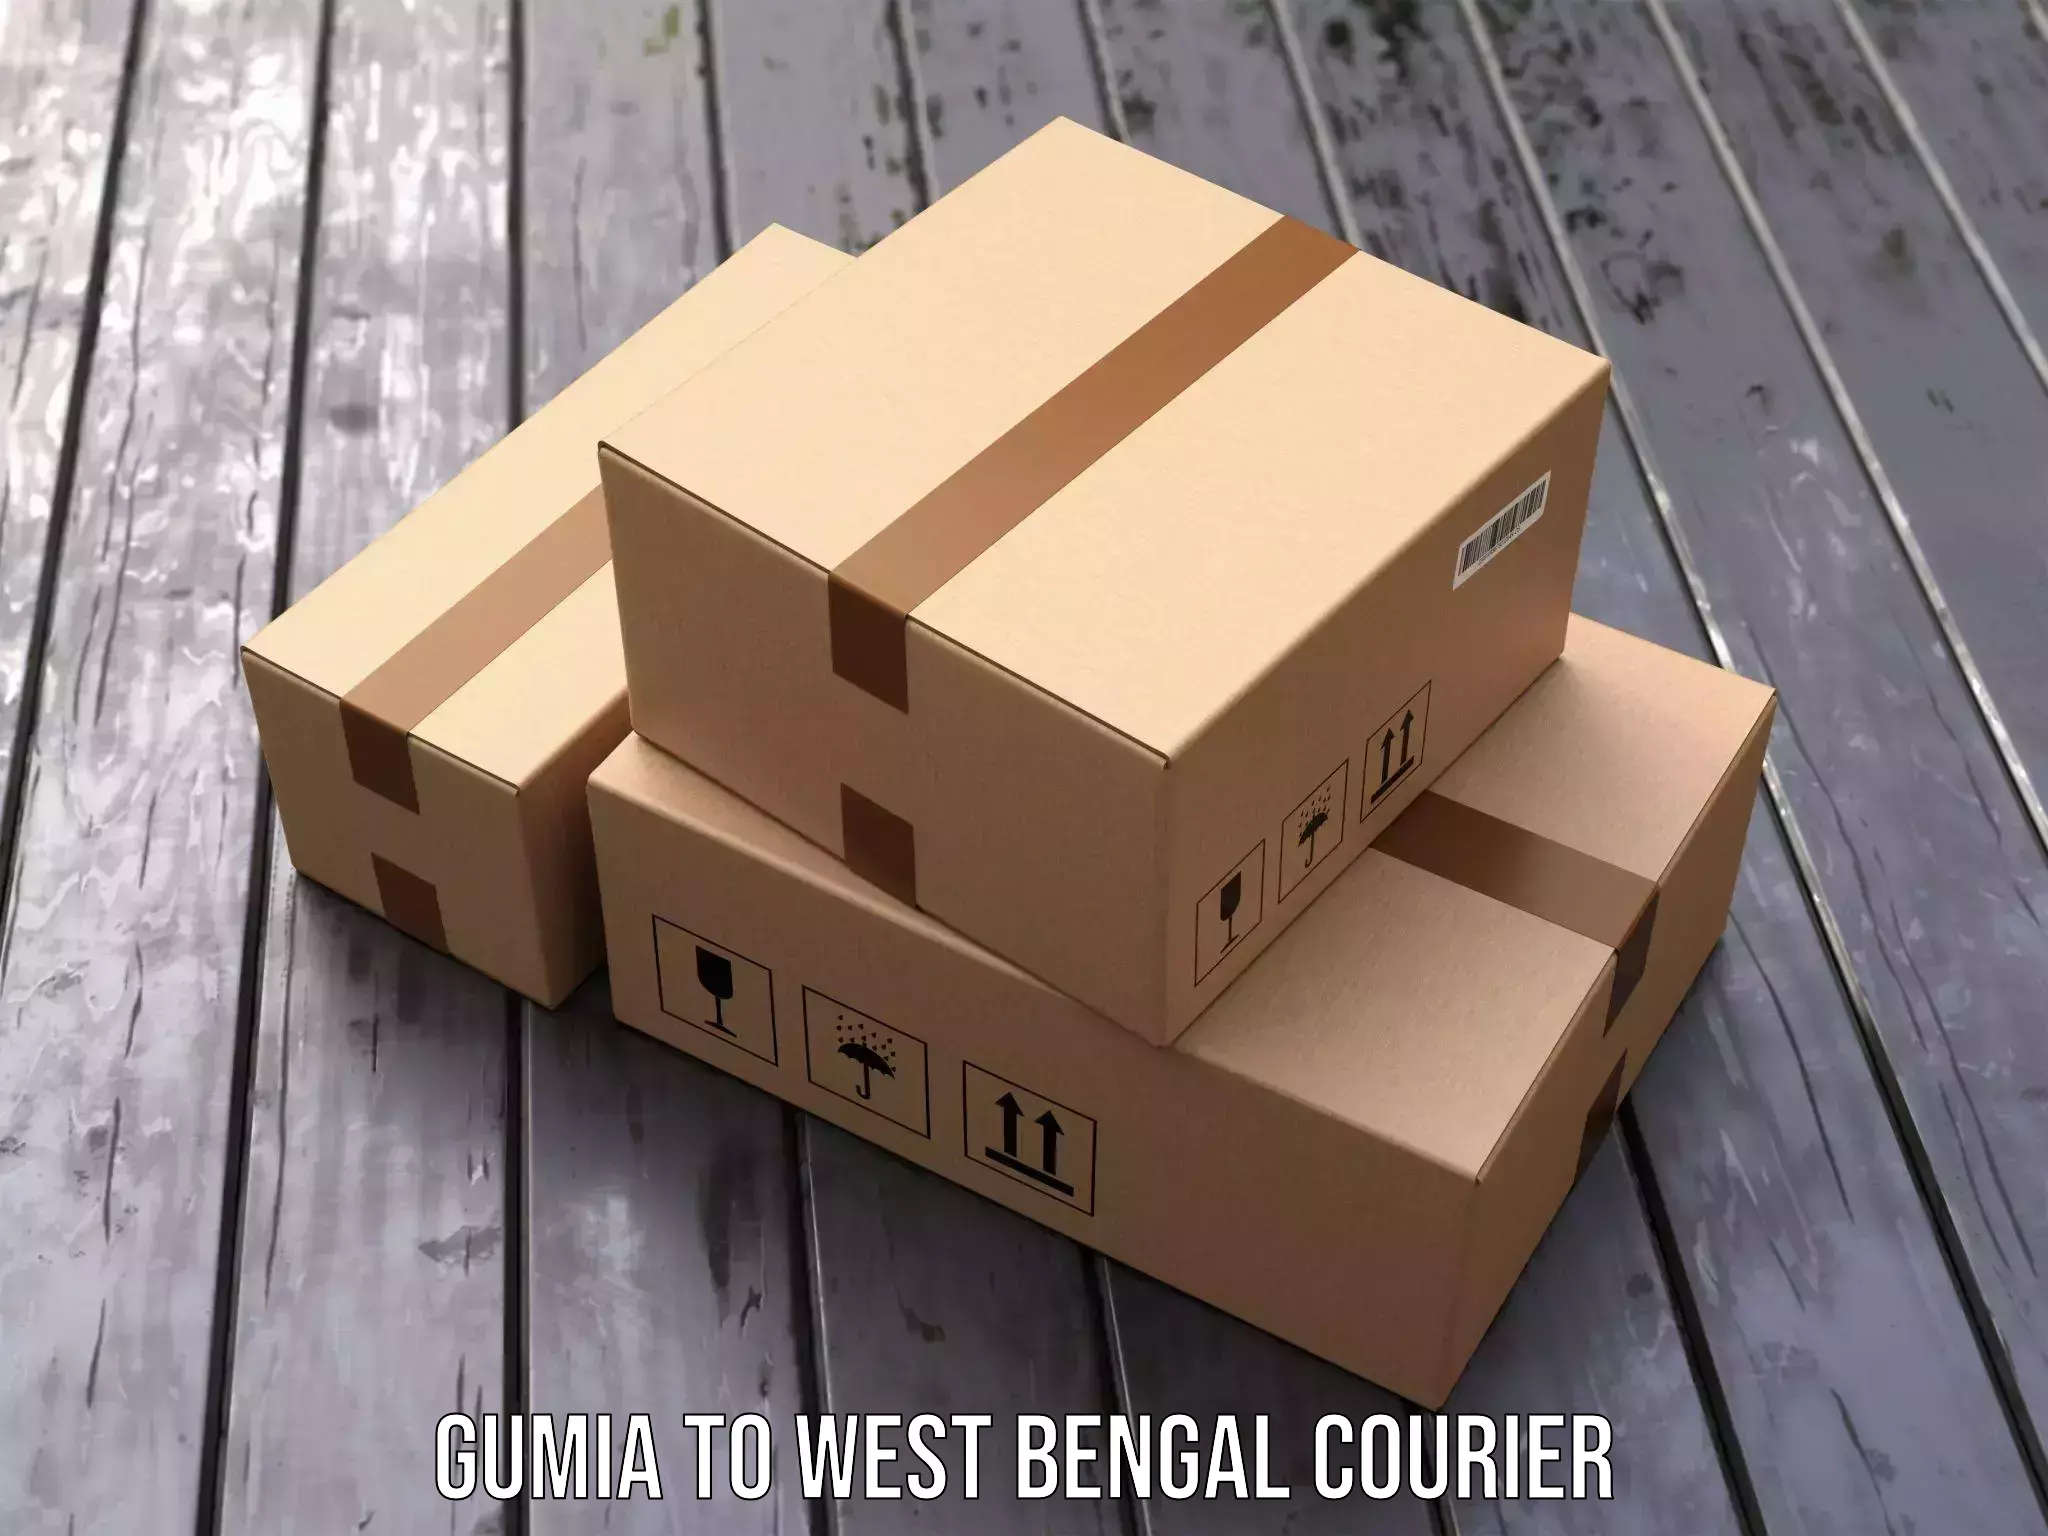 Ground shipping Gumia to West Bengal